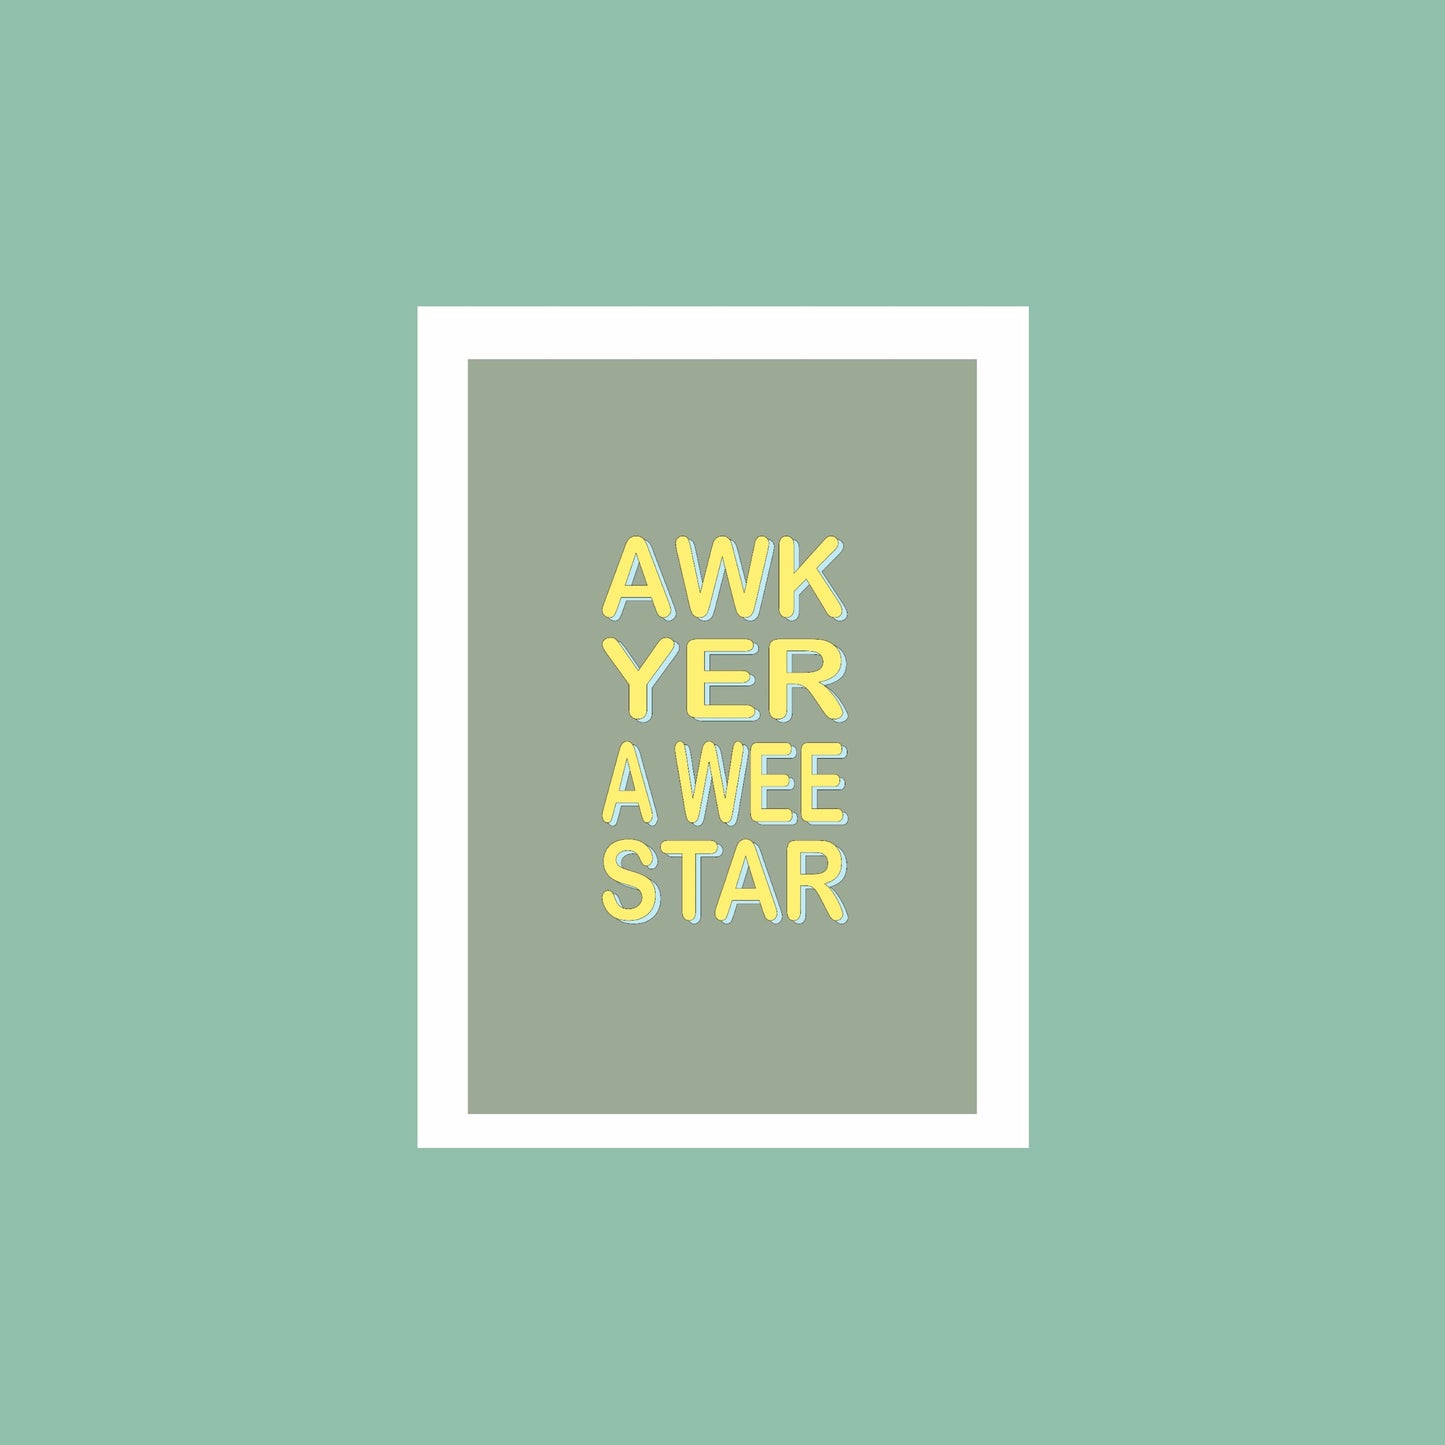 Awk yer a wee star